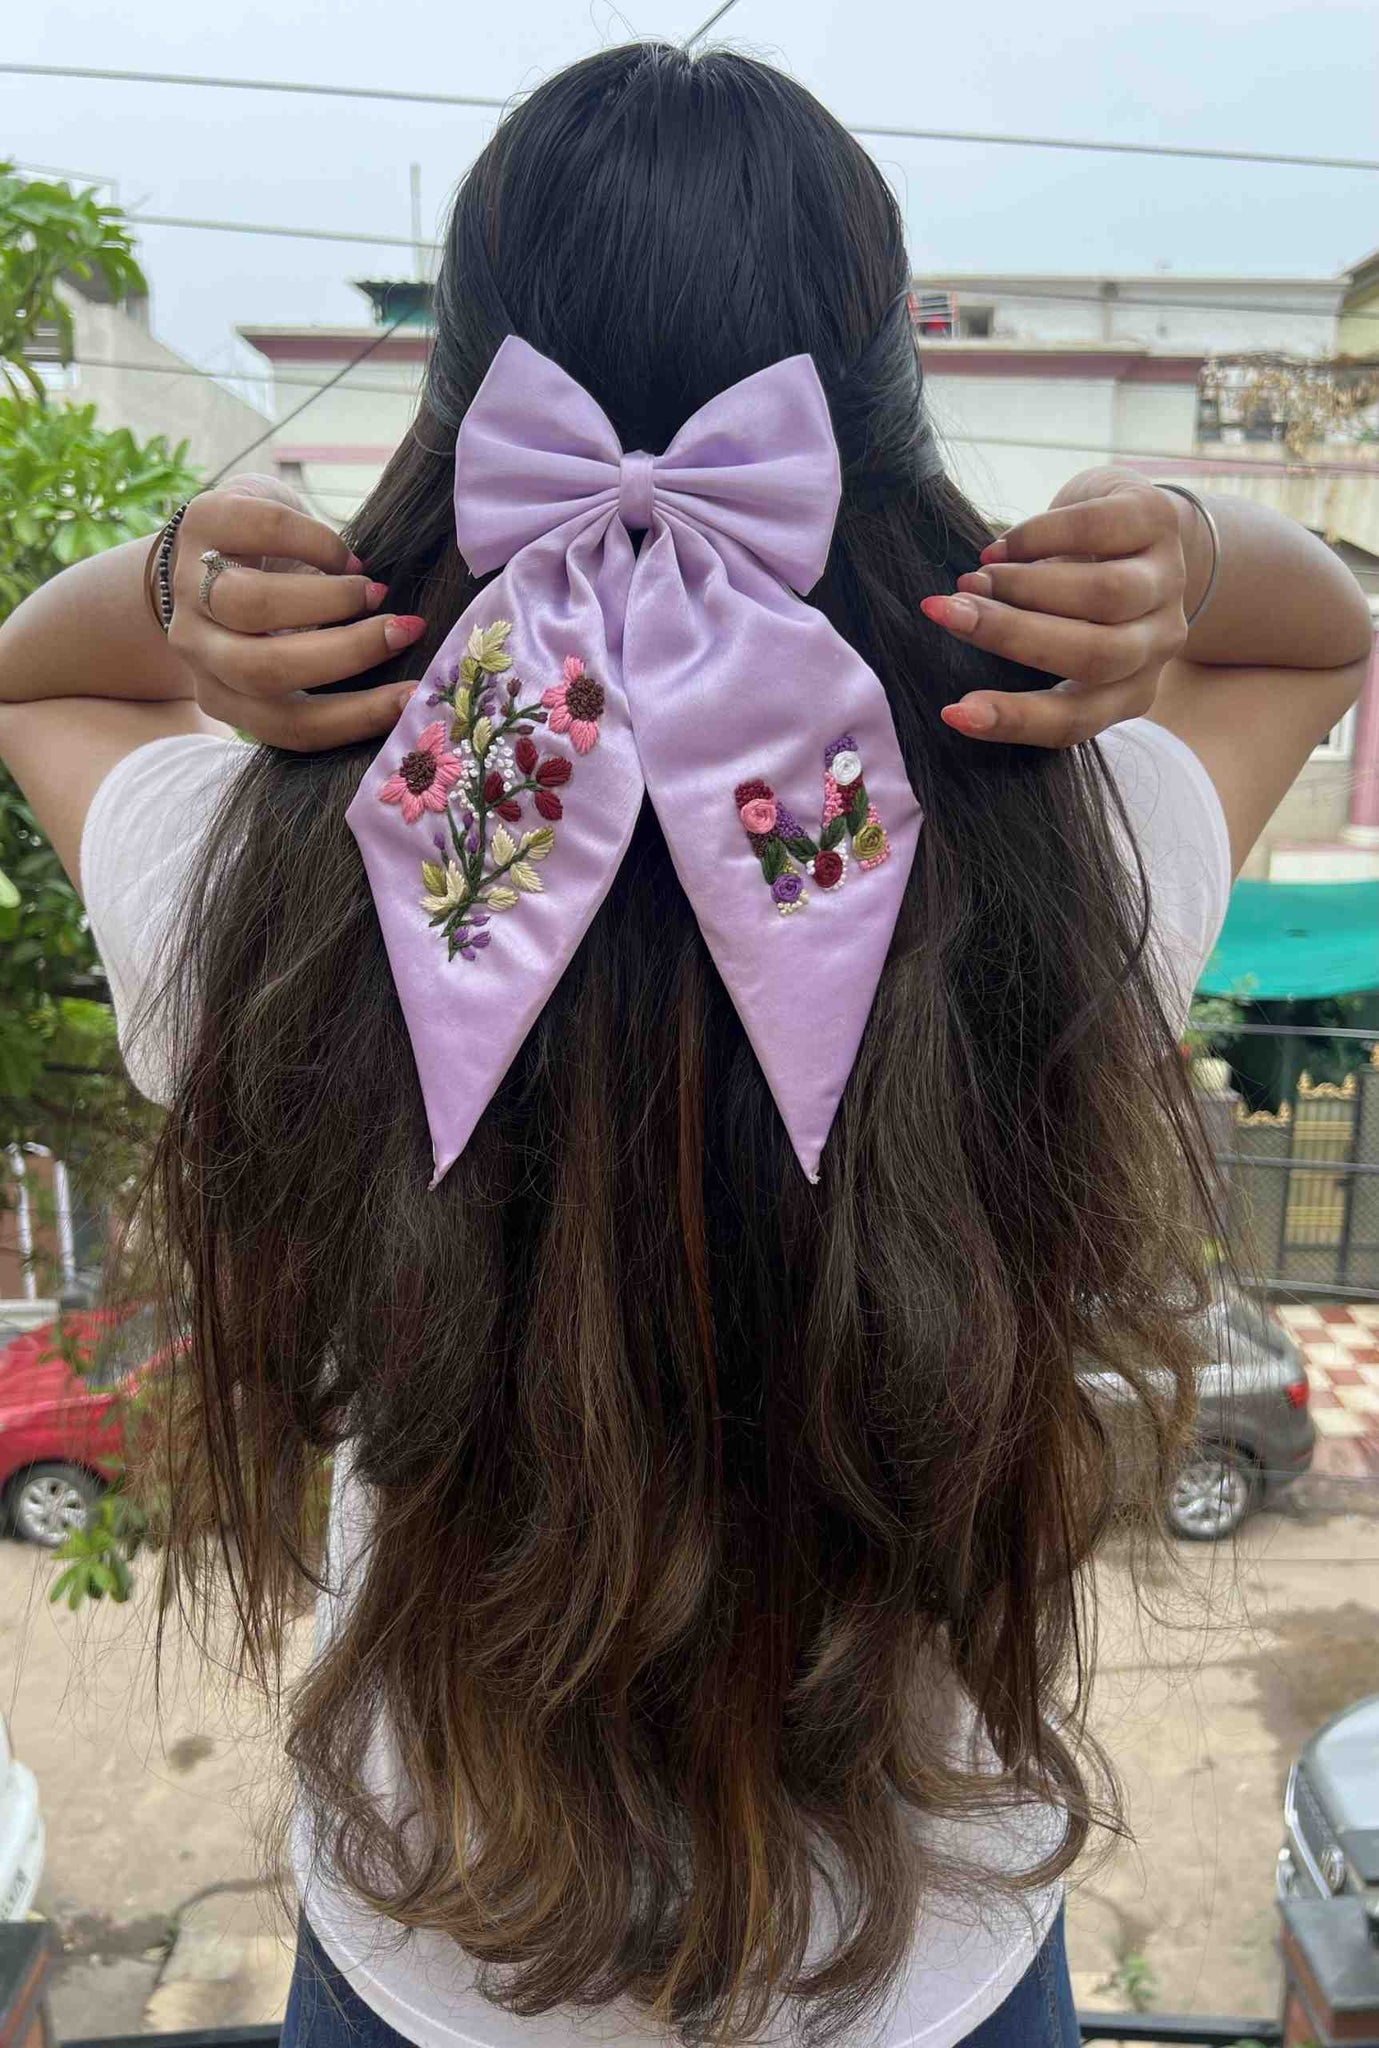 Lilac floral embroidered bow with initial